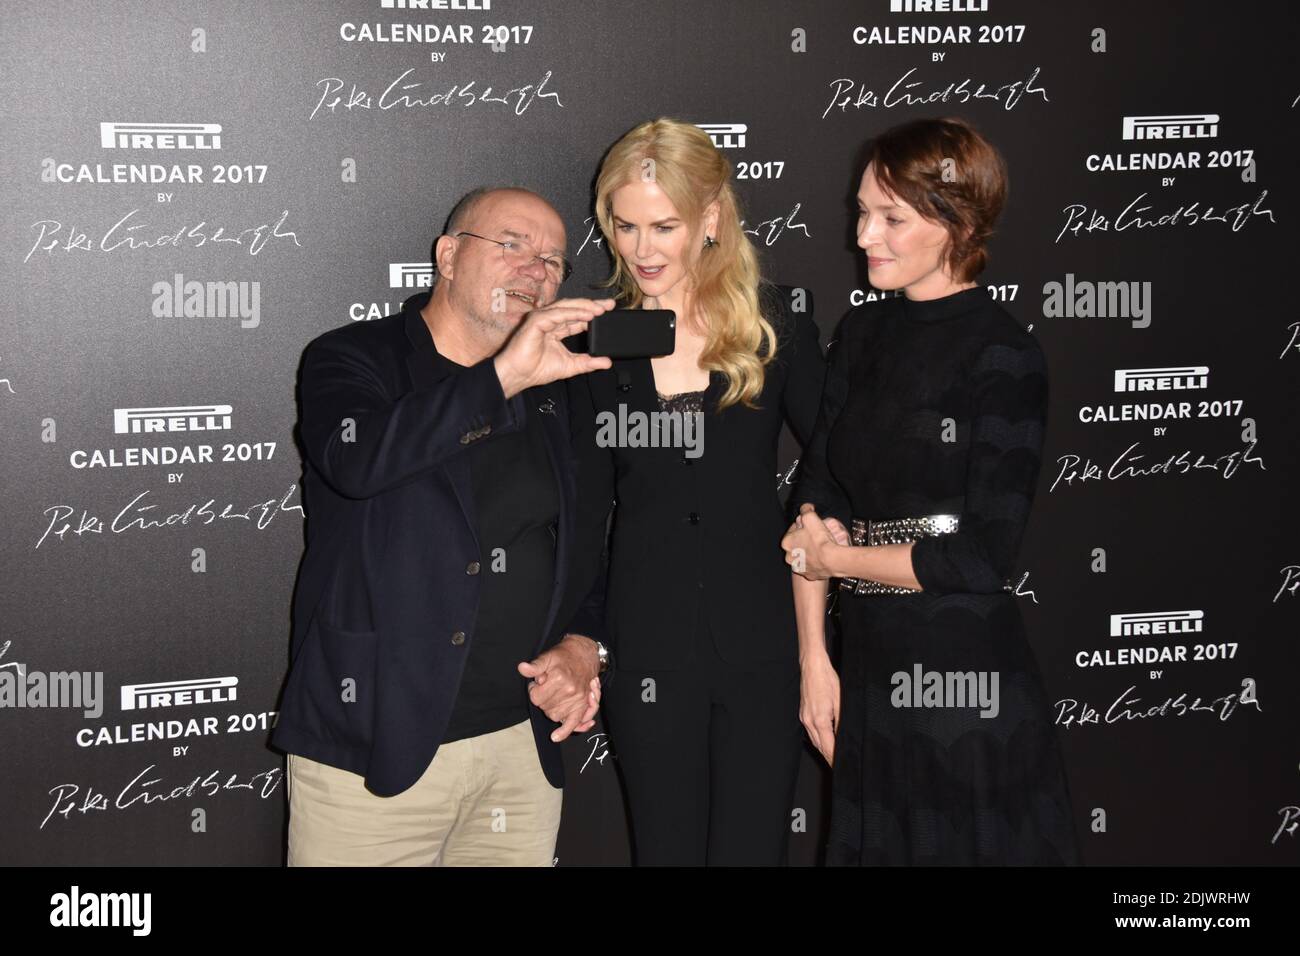 Uma Thurman, Nicole Kidman, Peter Lindbergh attending the press conference for the 2017 Pirelli Calendar by Peter Lindbergh at Hotel Salomon de Rothschild in Paris, France on November 29, 2016. Photo by Alban Wyters/ABACAPRESS.COM Stock Photo